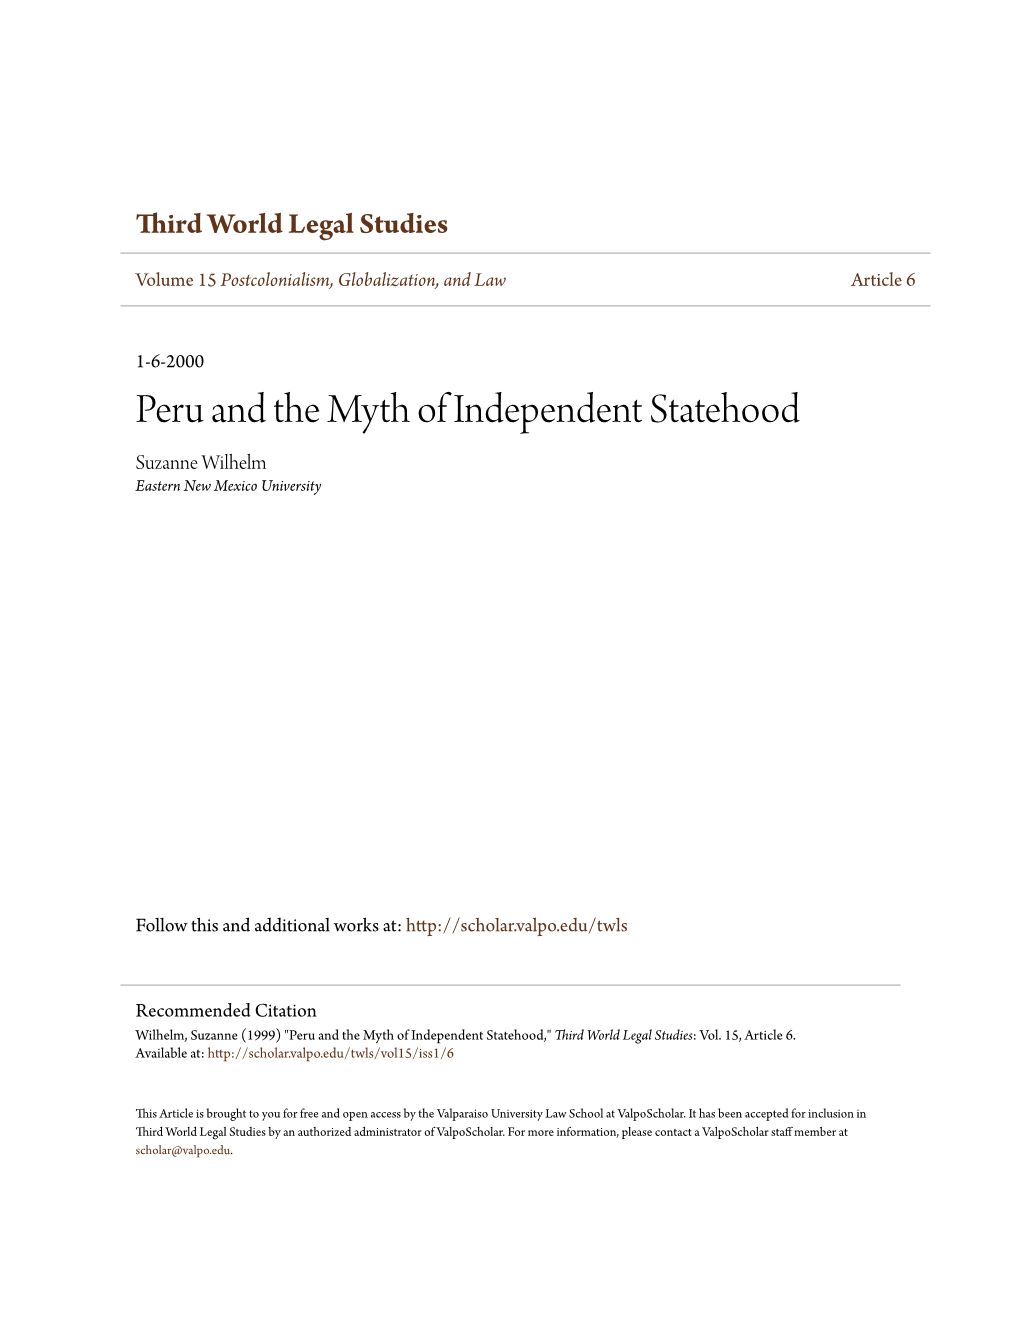 Peru and the Myth of Independent Statehood Suzanne Wilhelm Eastern New Mexico University